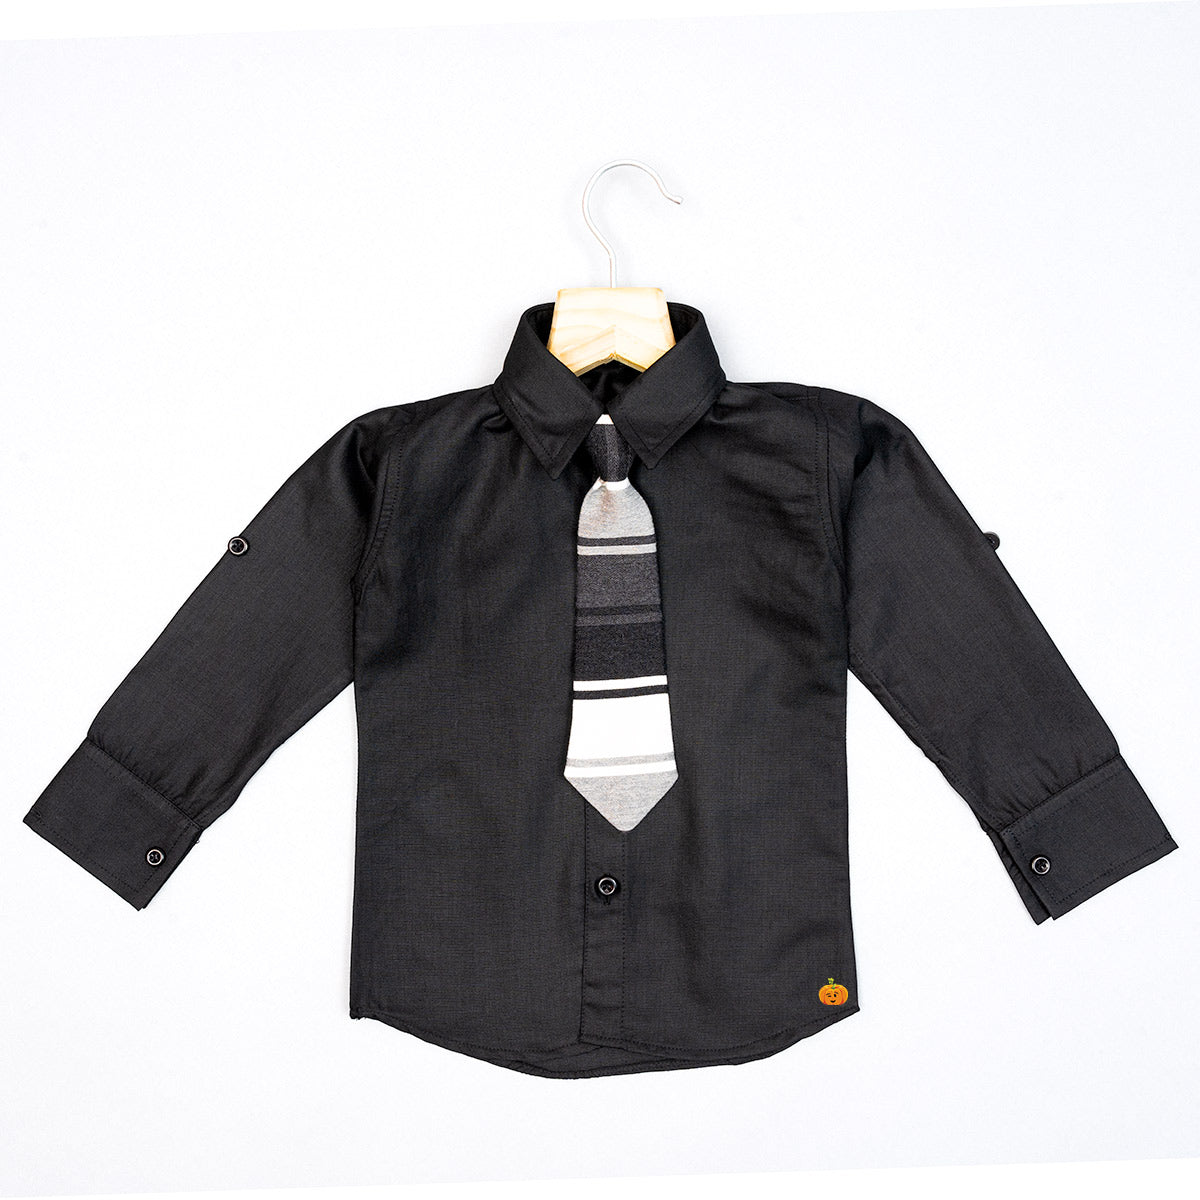 Kids Shirts - Upto 50% to 80% OFF on Girls & Boys Shirts Online At Best  Prices In India - Flipkart.com